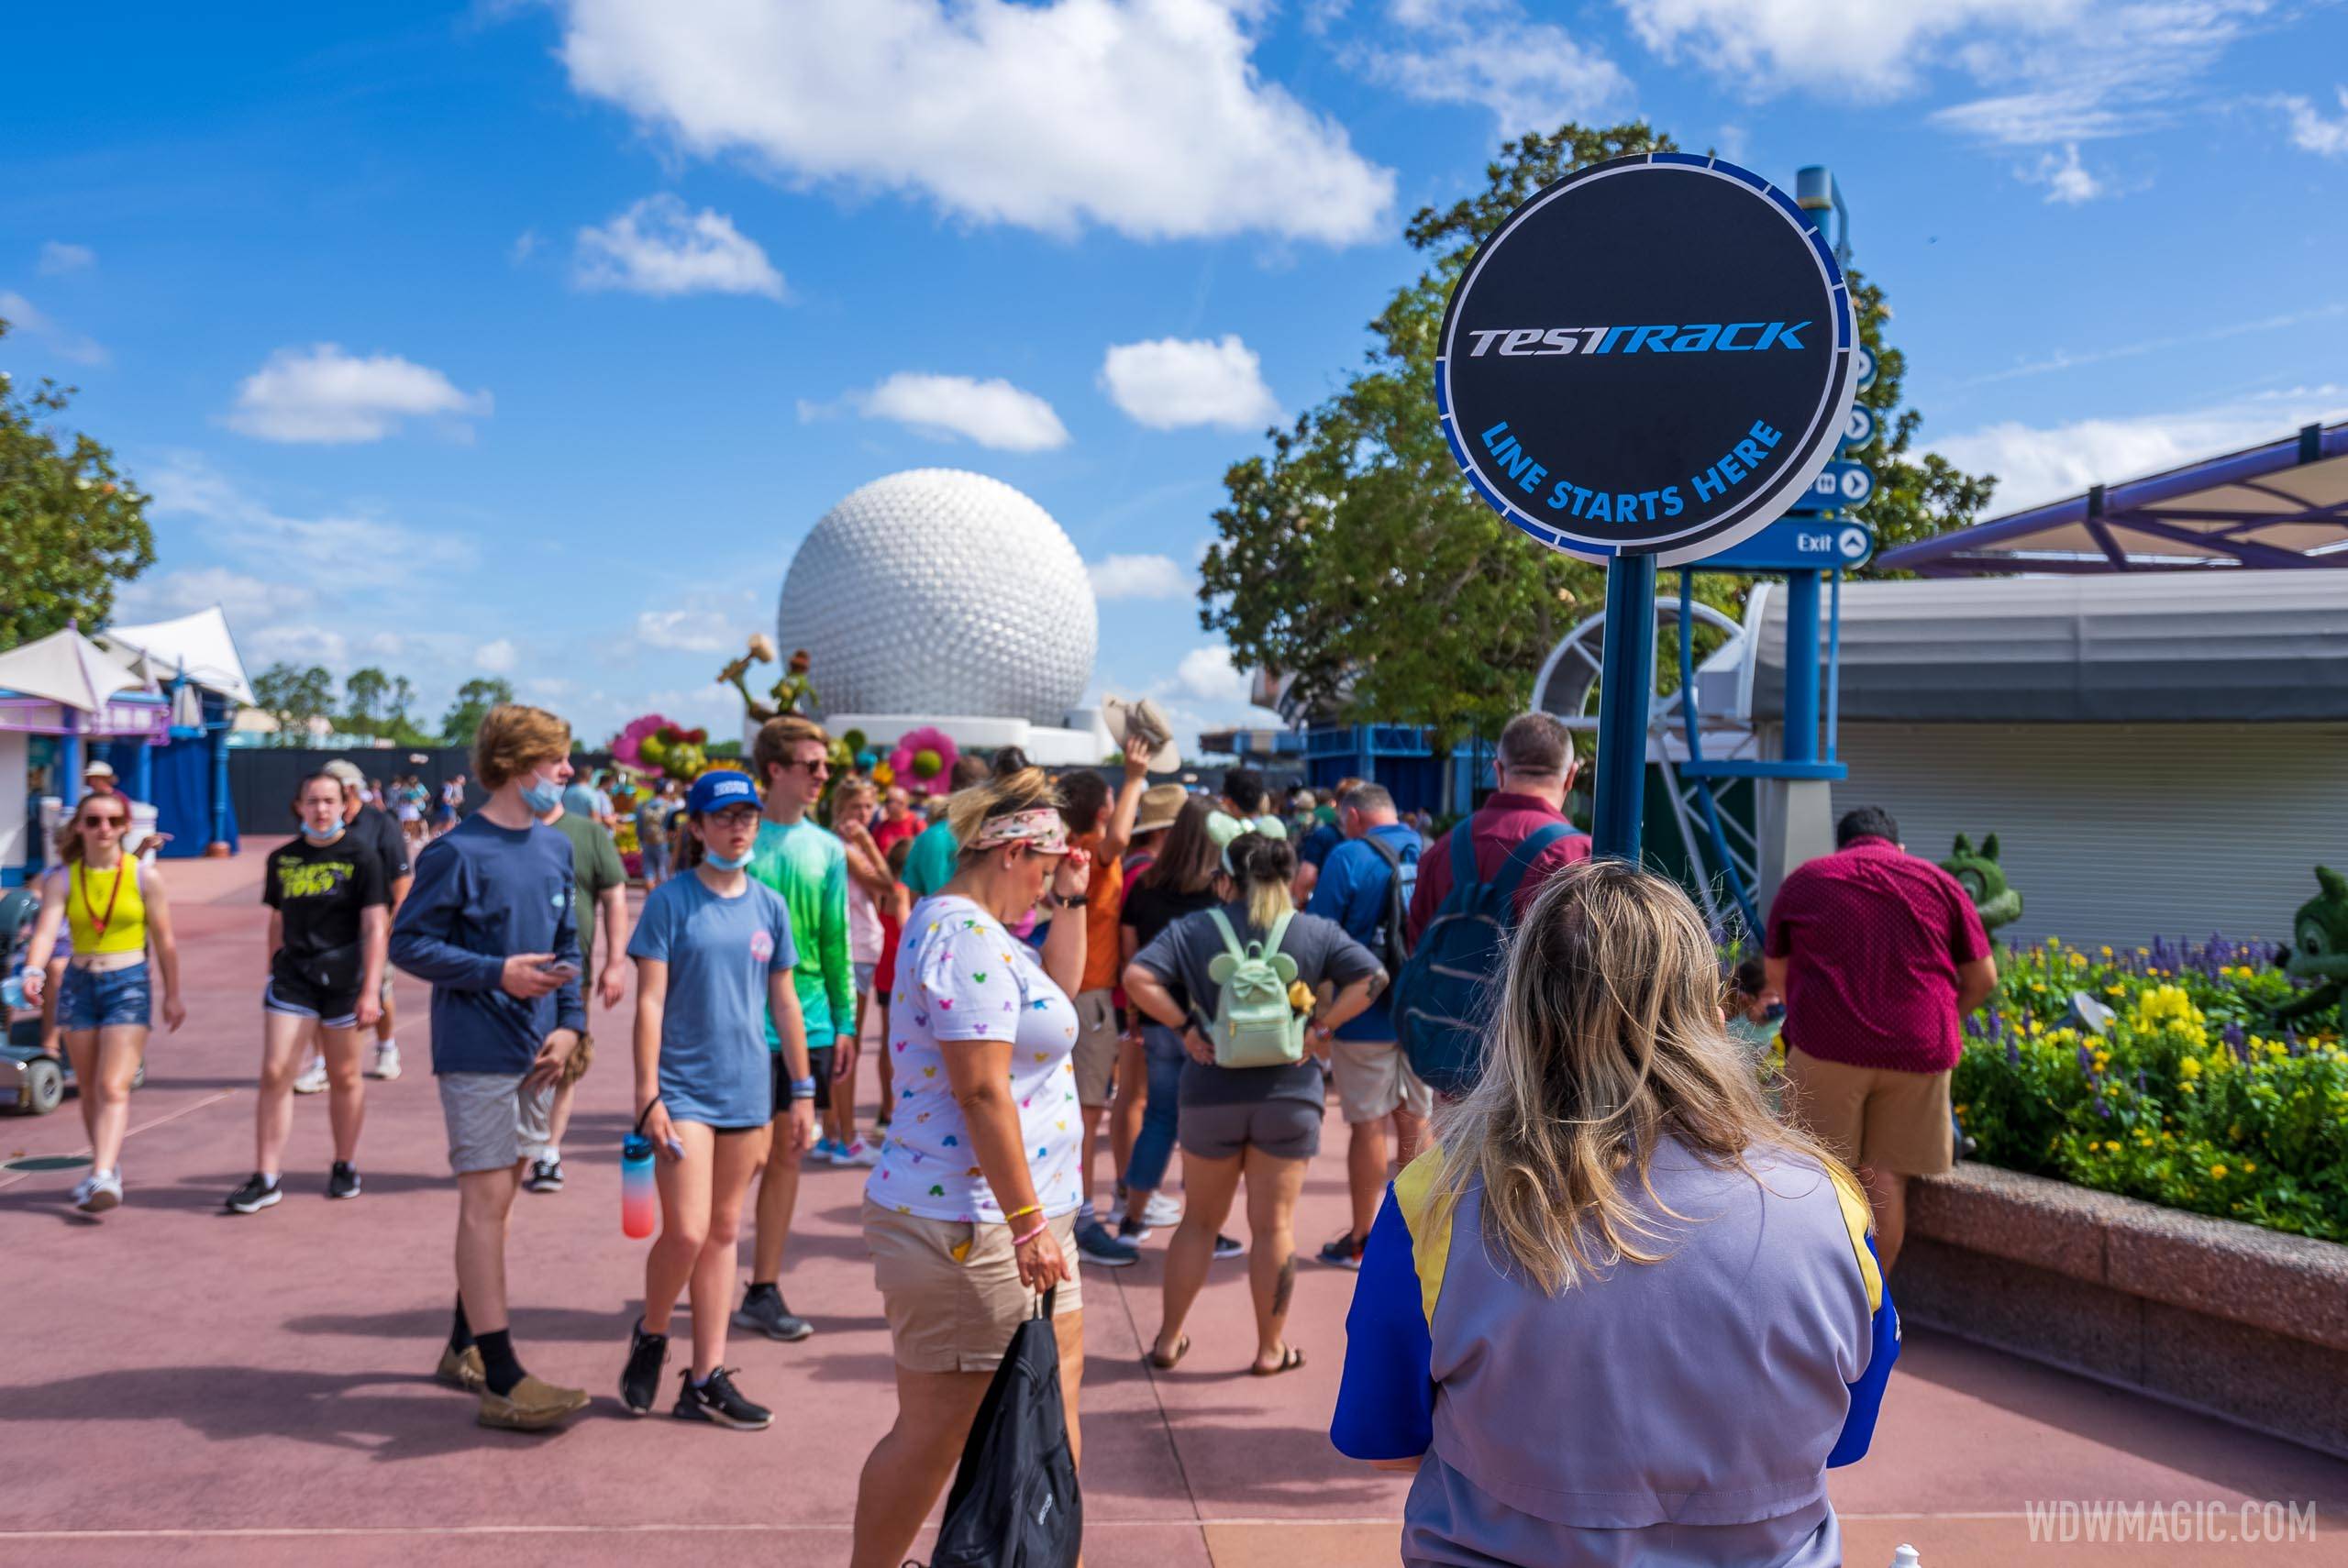 The end of the line at 10:40am for Test Track